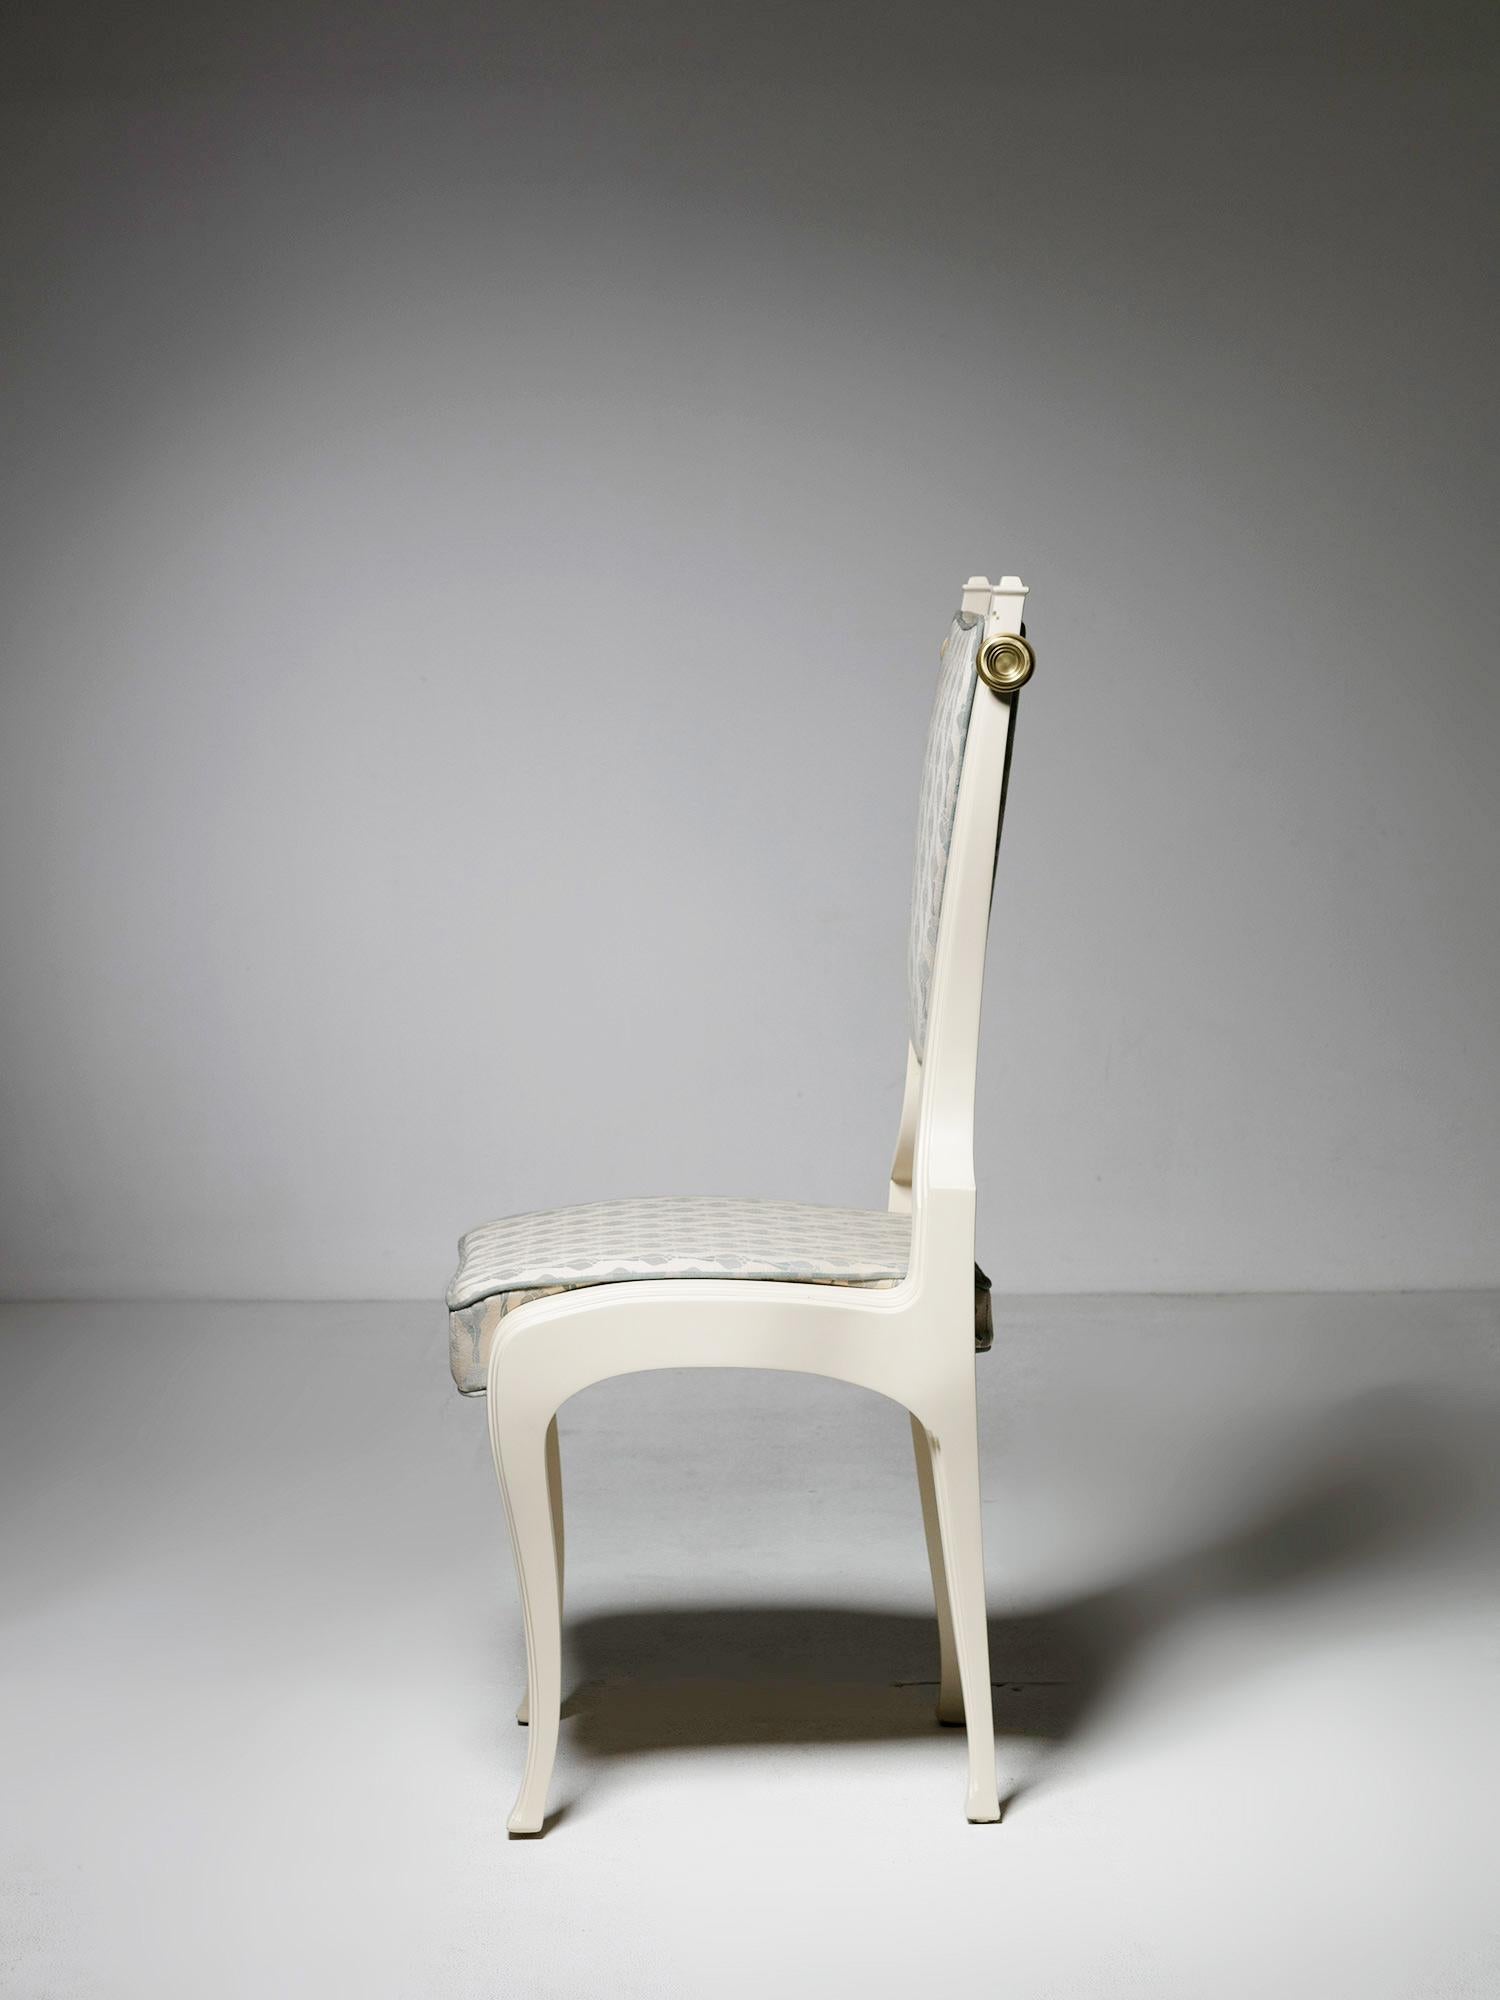 Italian Rare Sculptural Chair by Paolo Portoghesi for B&B Italia, Italy, 1990 For Sale